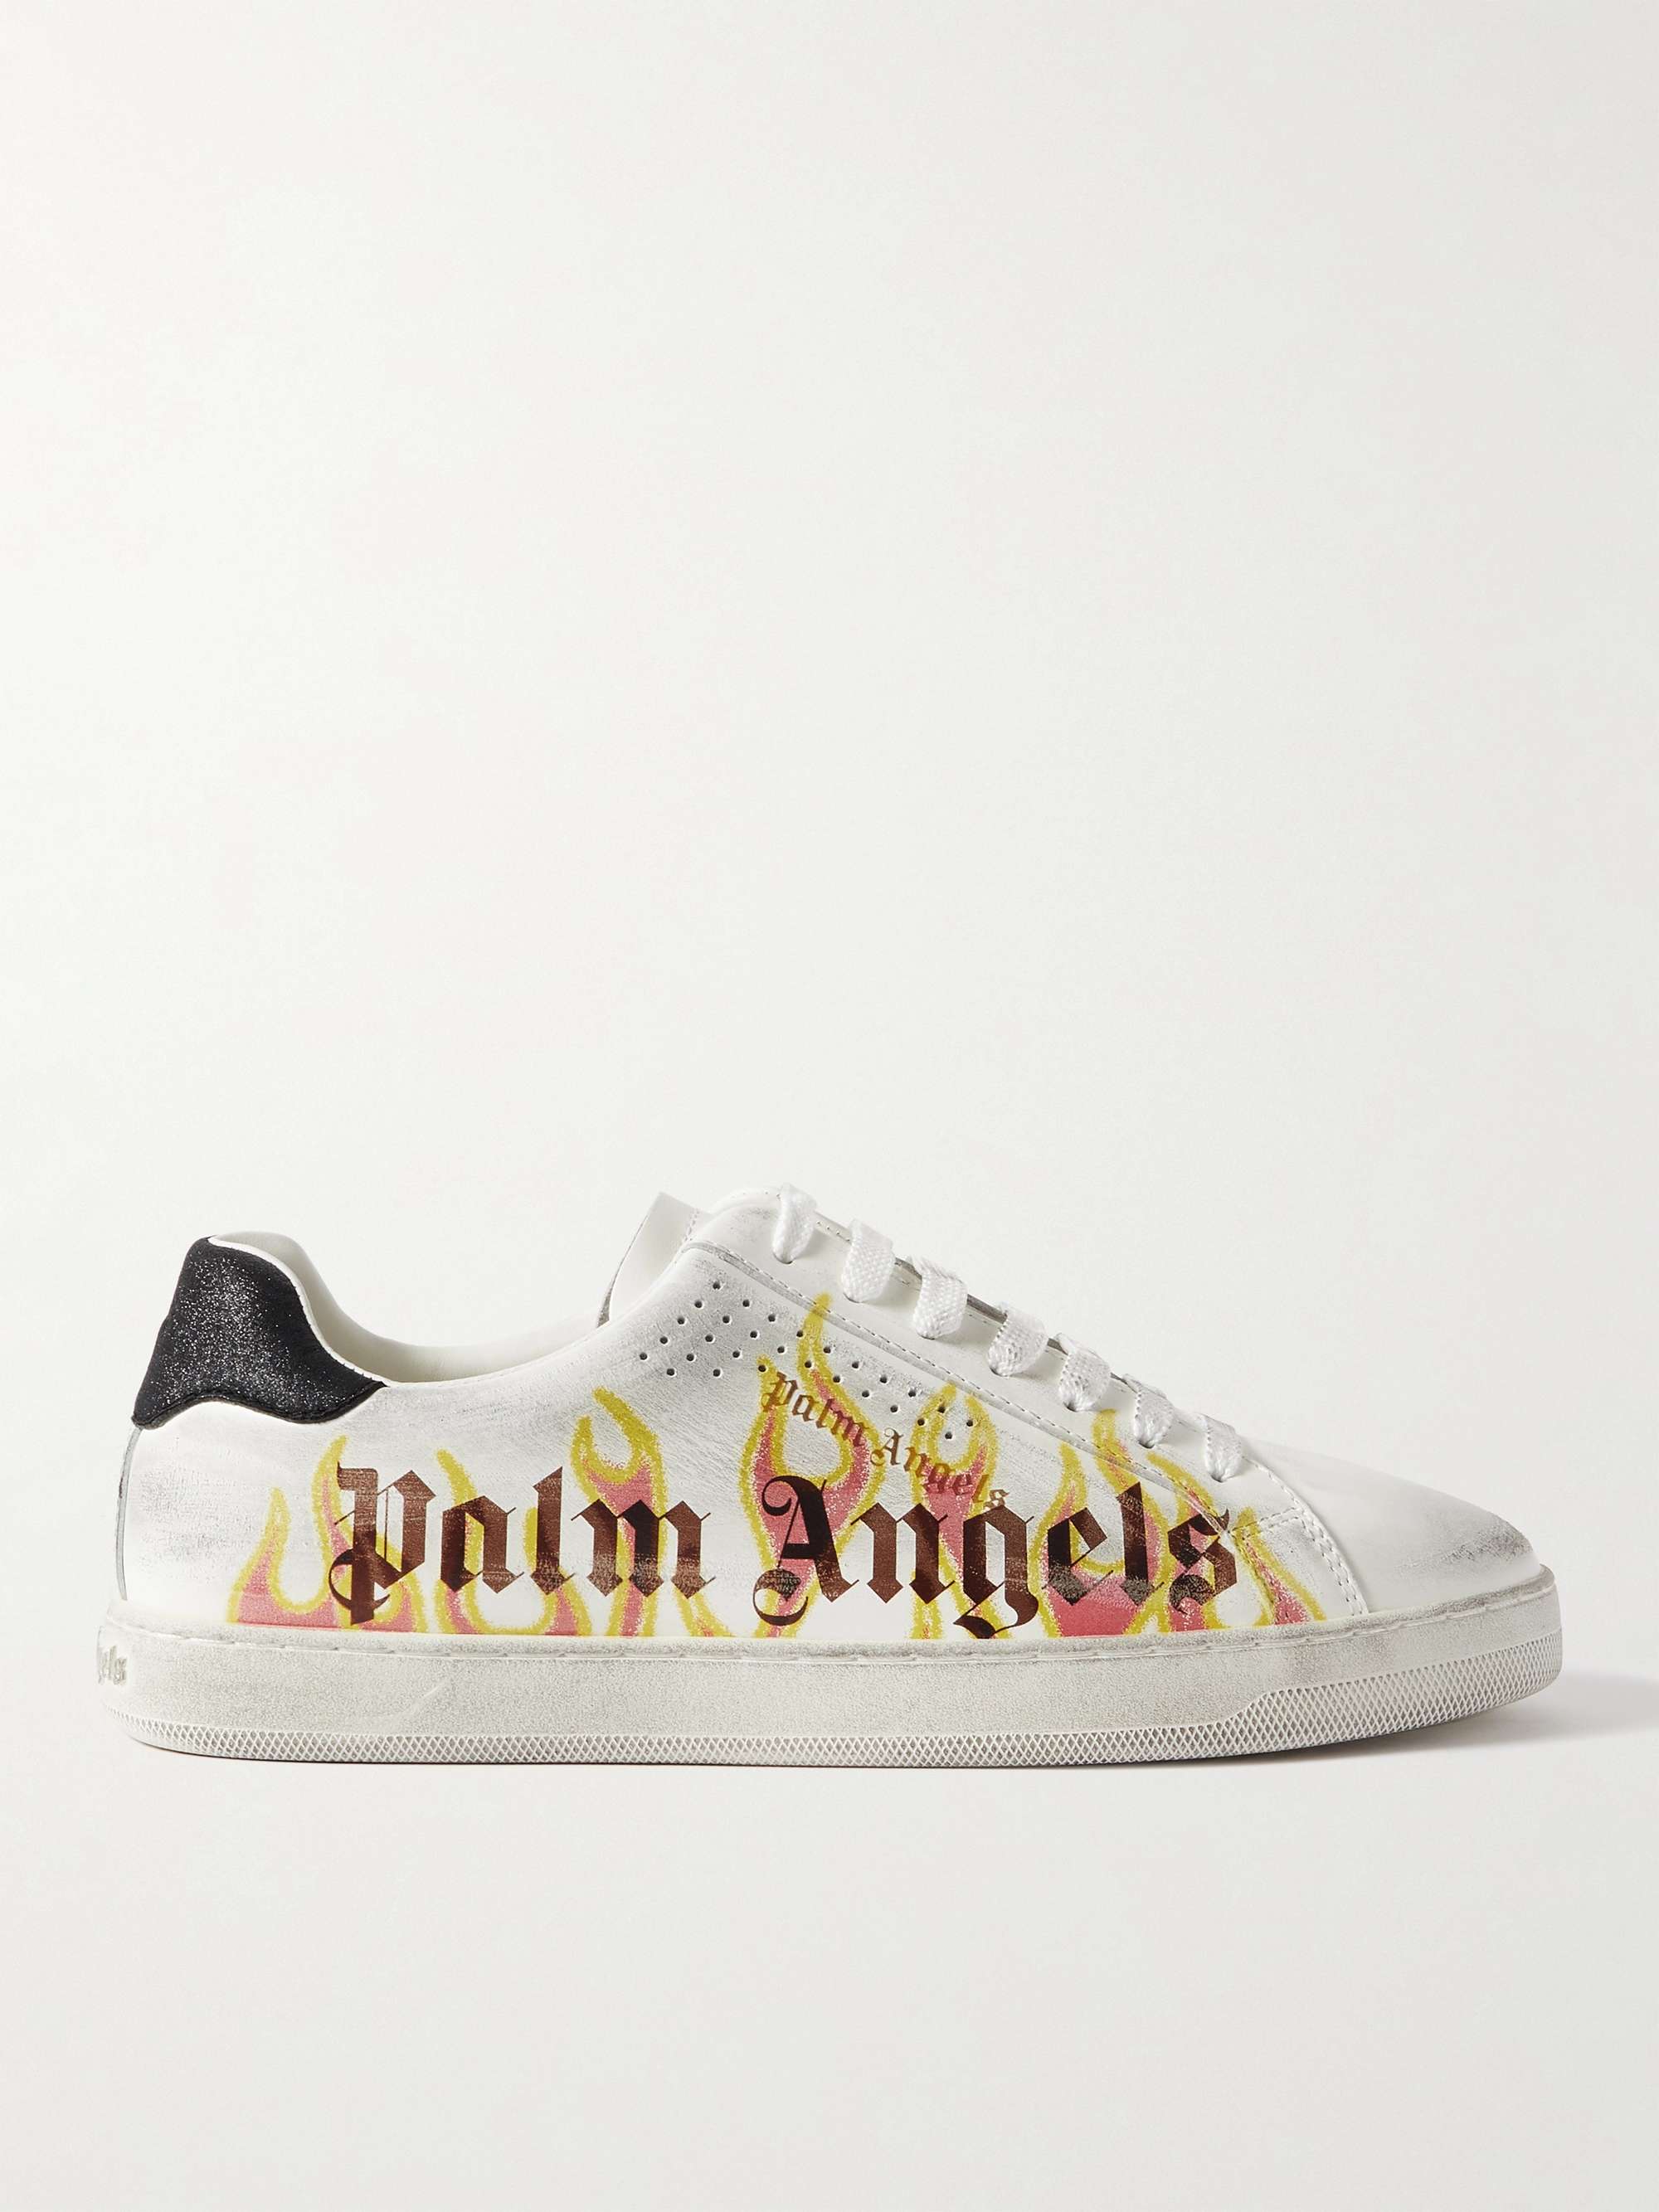 PALM ANGELS Distressed Logo-Print Suede-Trimmed Leather Sneakers | MR PORTER